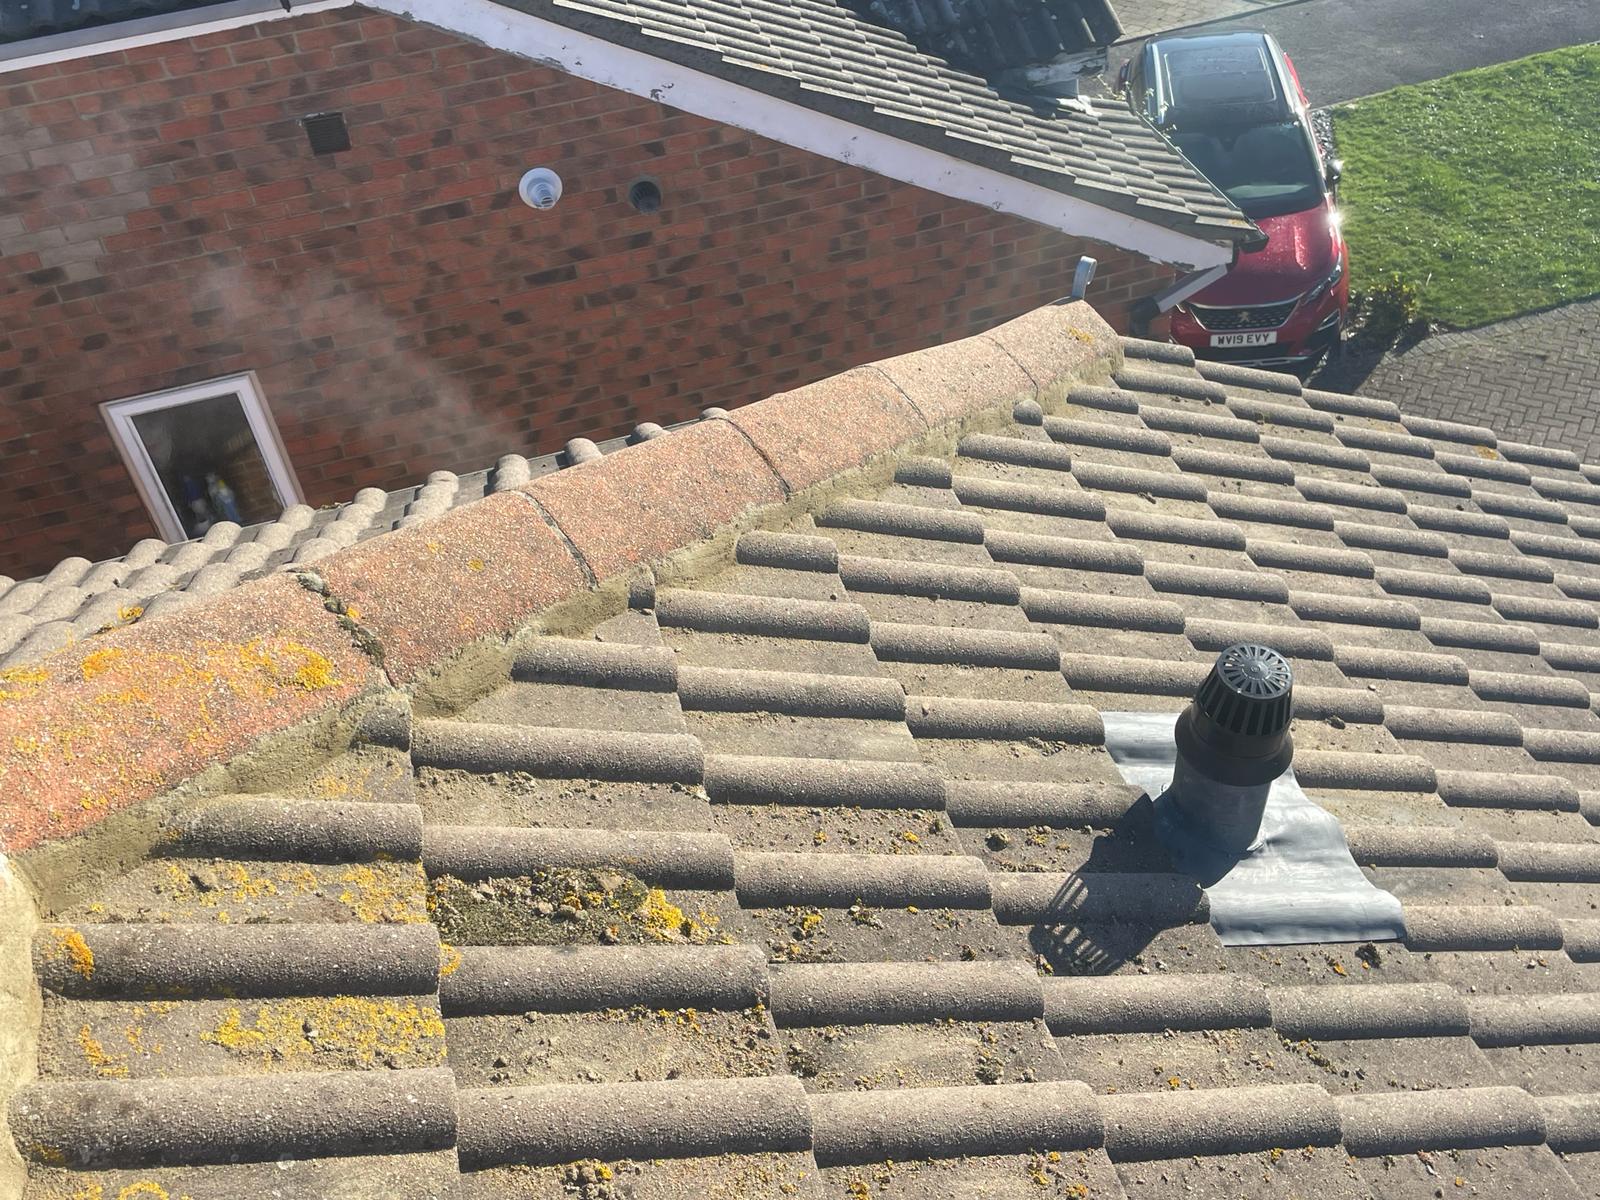 Bird's-eye view of South Coast Roofers' roofing work, with focus on the neatly arranged roof tiles and secure vent pipe installation.